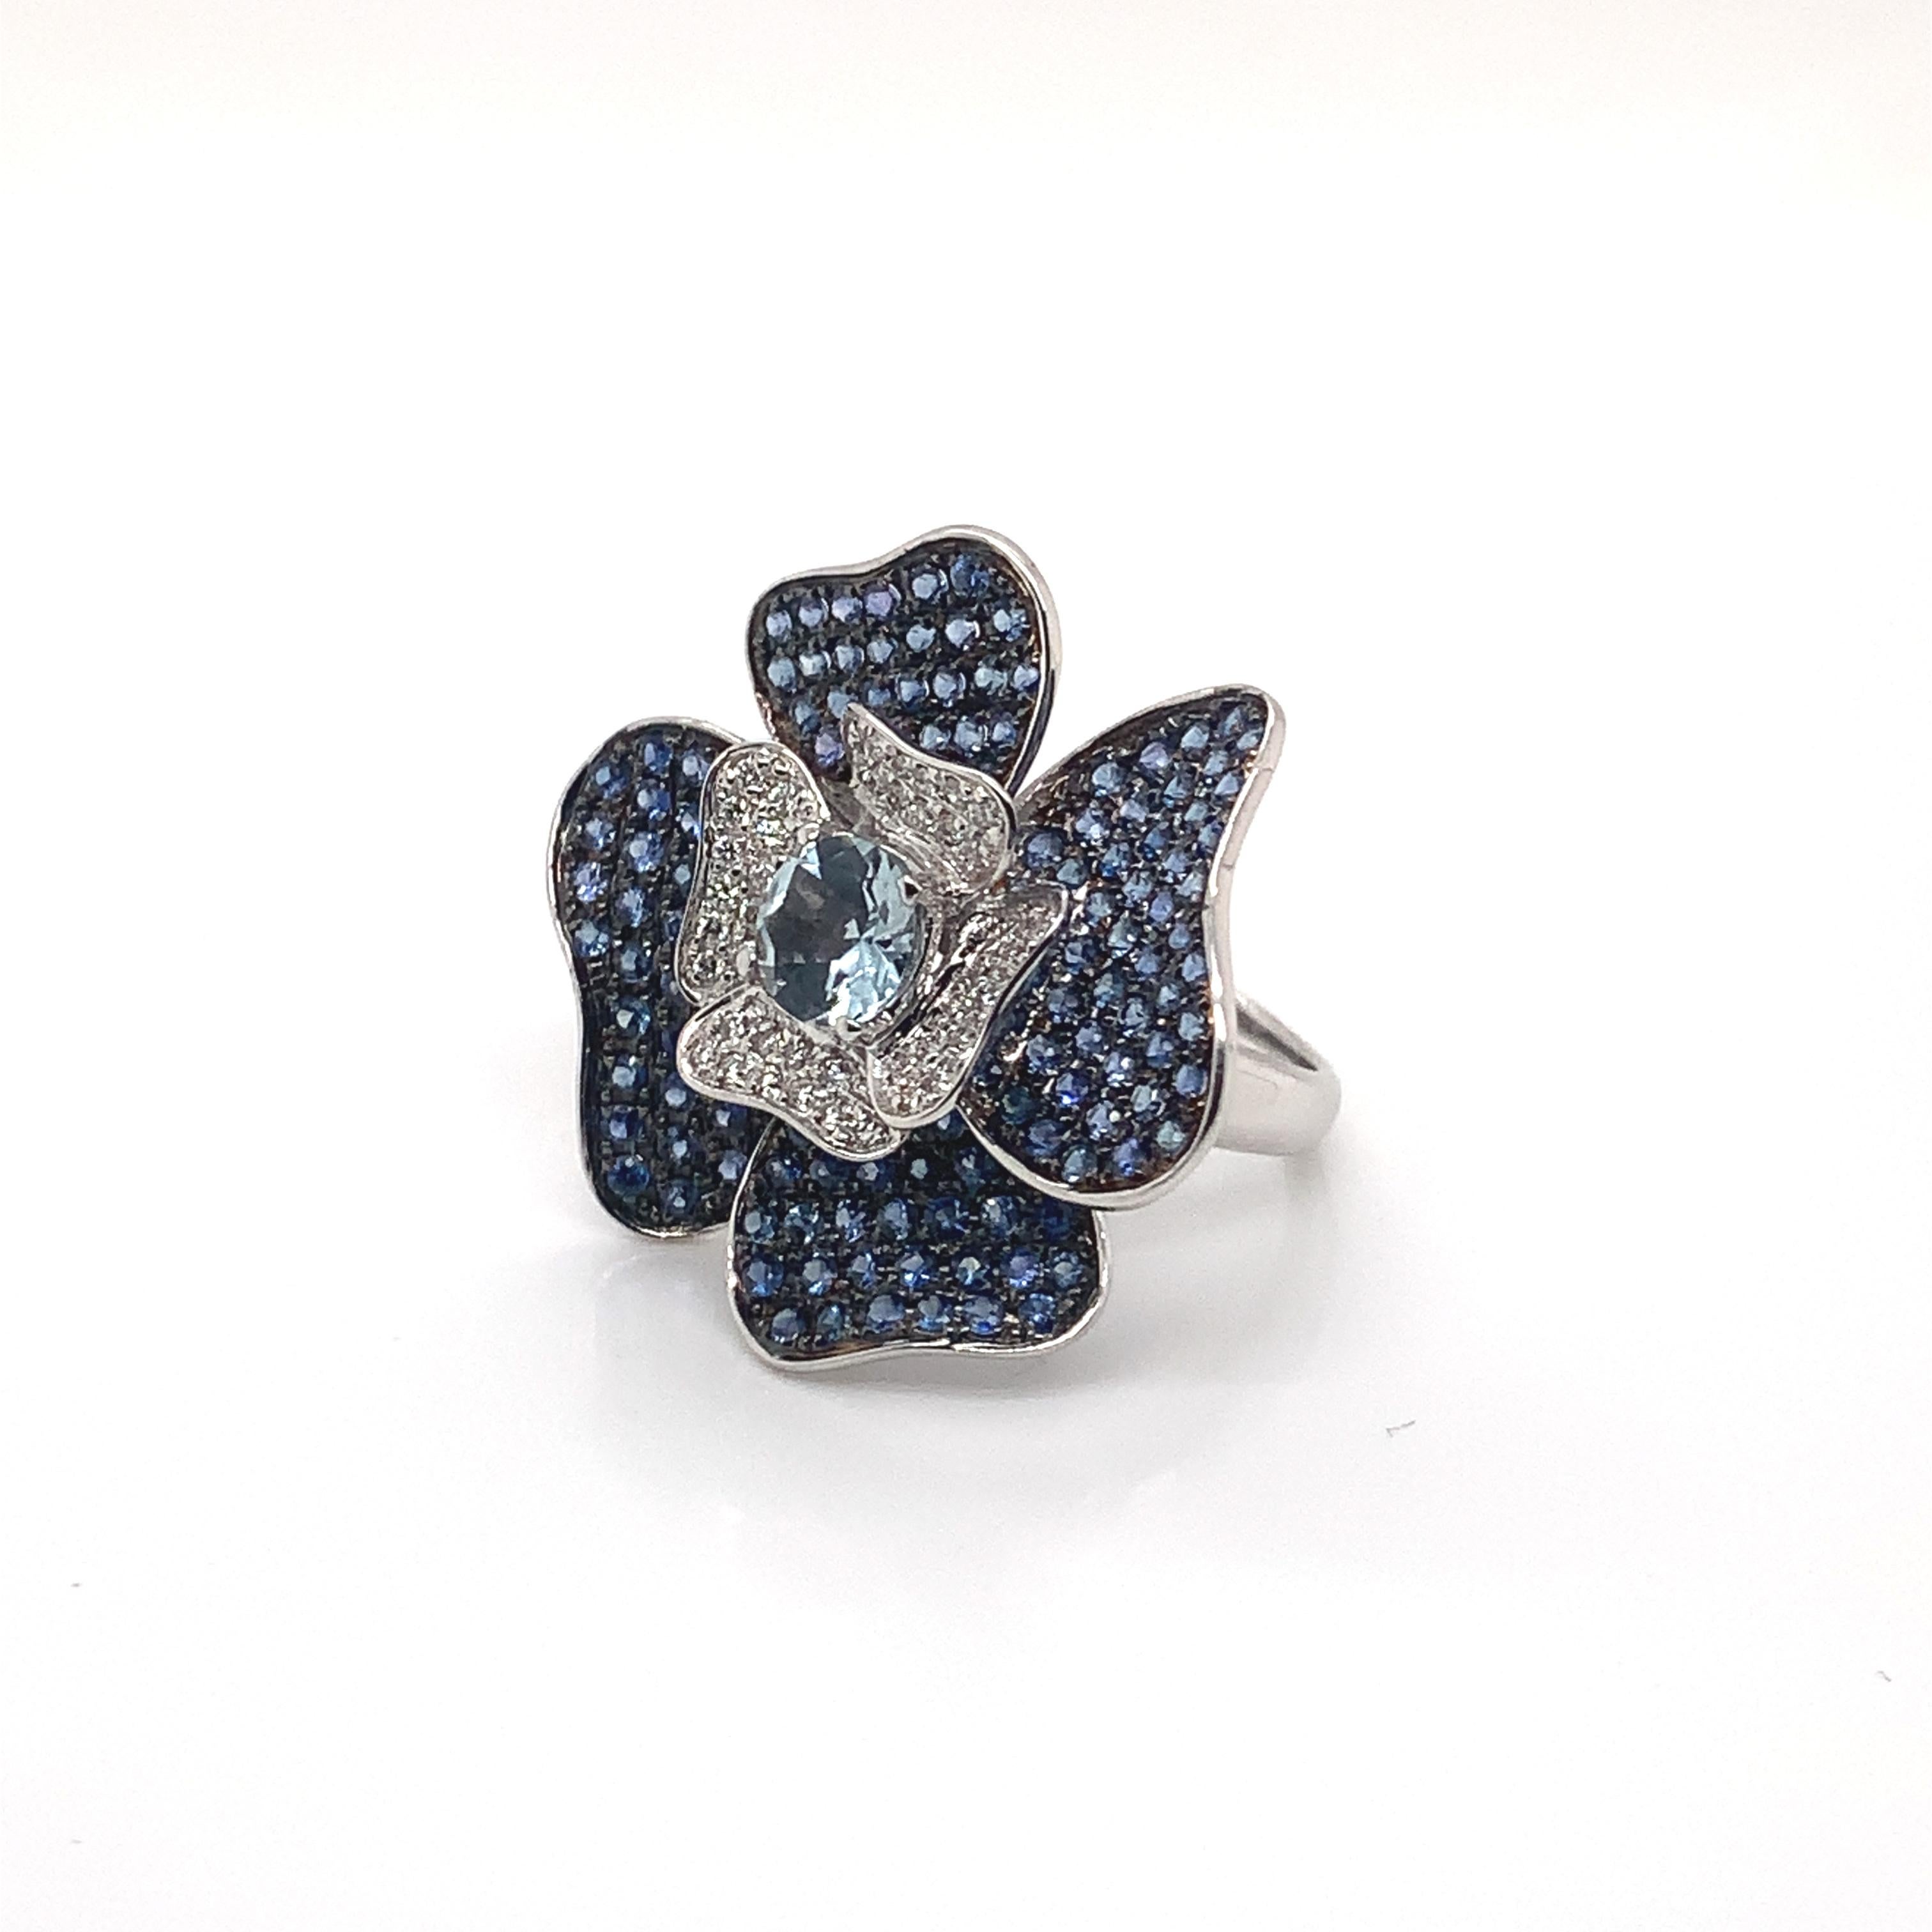 Glamorous Gemstones - Sunita Nahata started off her career as a gemstone trader, and this particular collection reflects her love for multi-colored semi-precious gemstones. This ring presents a floral aquamarine center with blue sapphire petals.